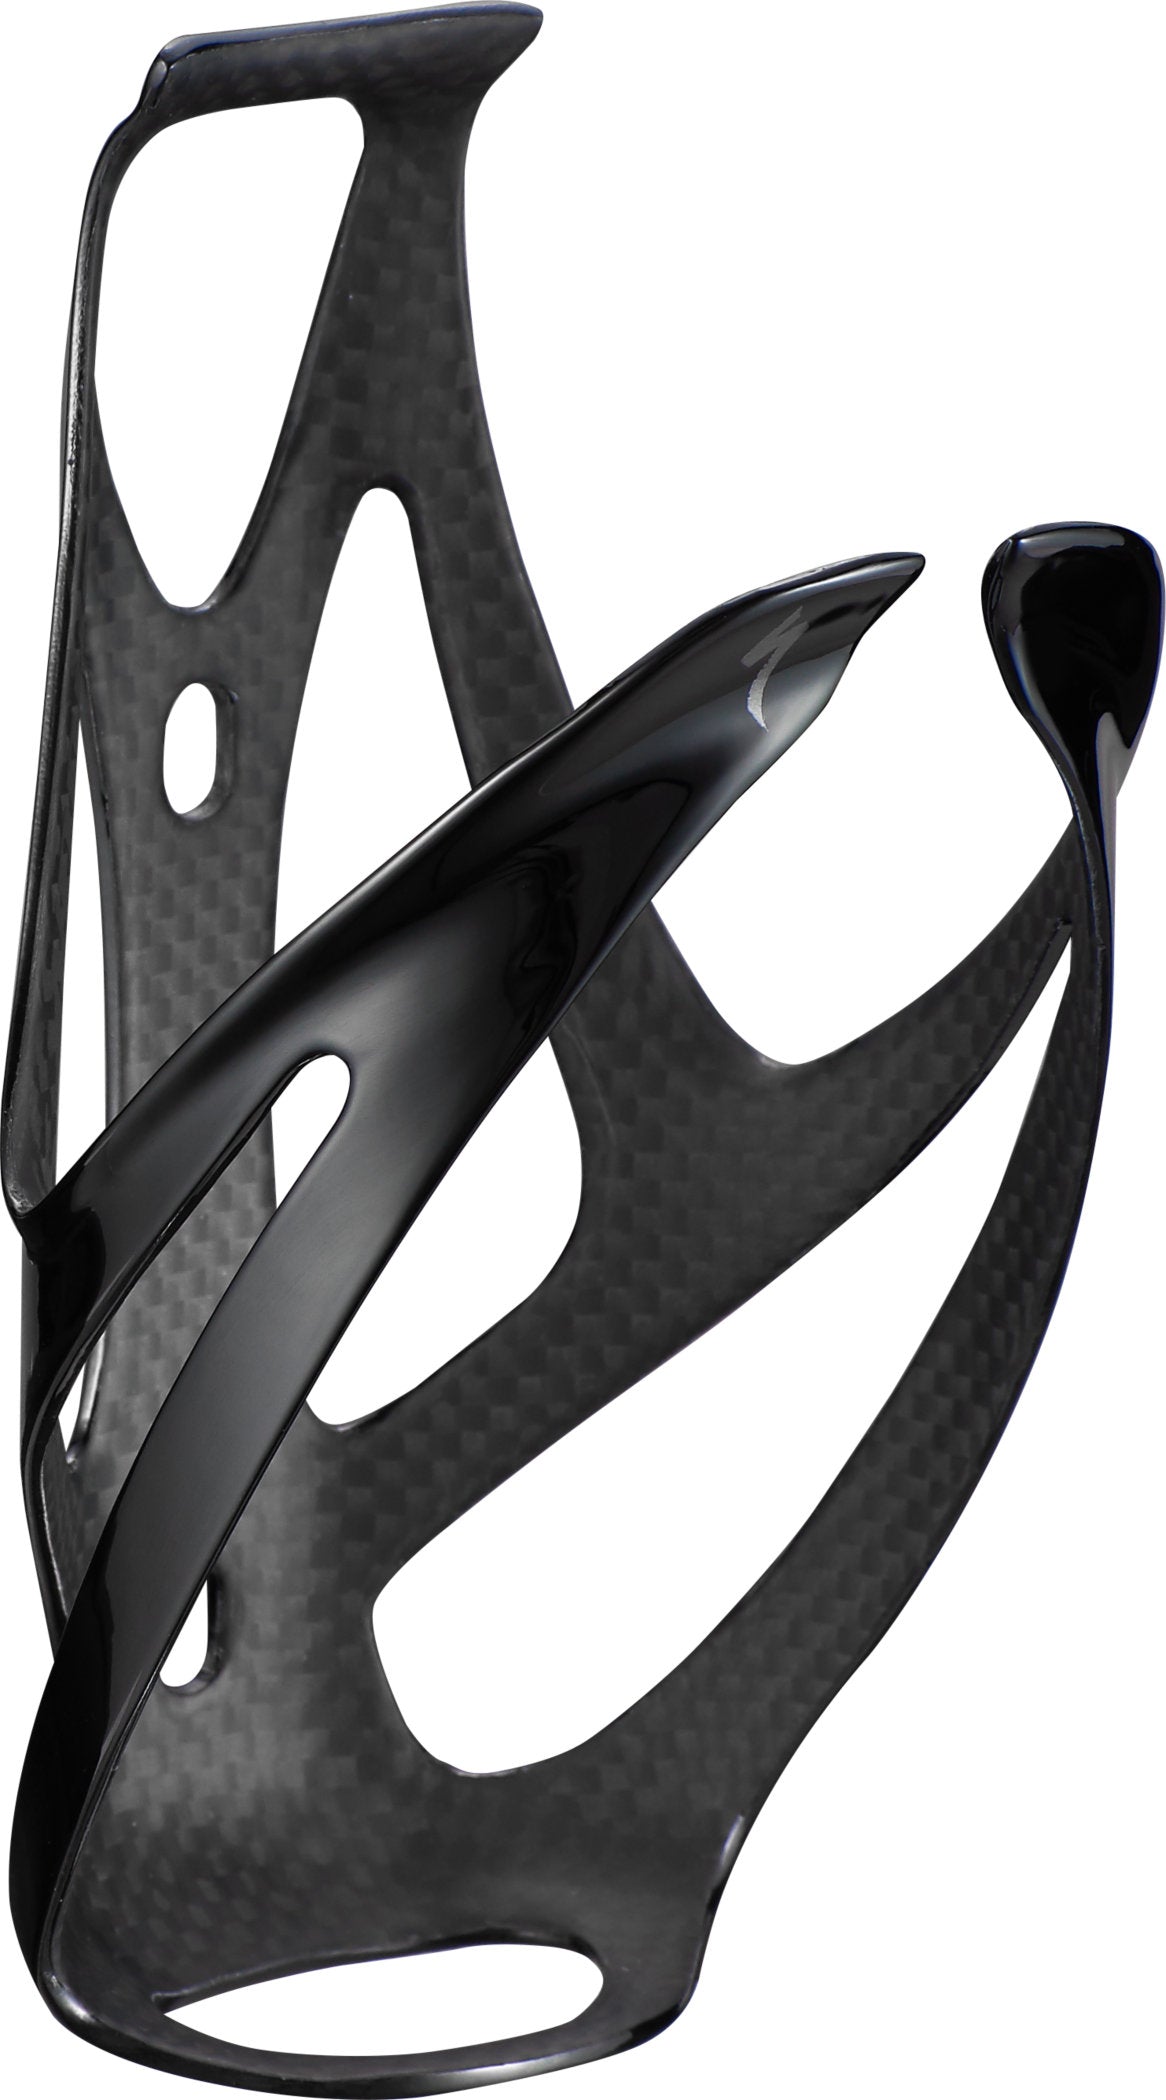 Specialized S-Works Carbon Rib Bicycle Cage III